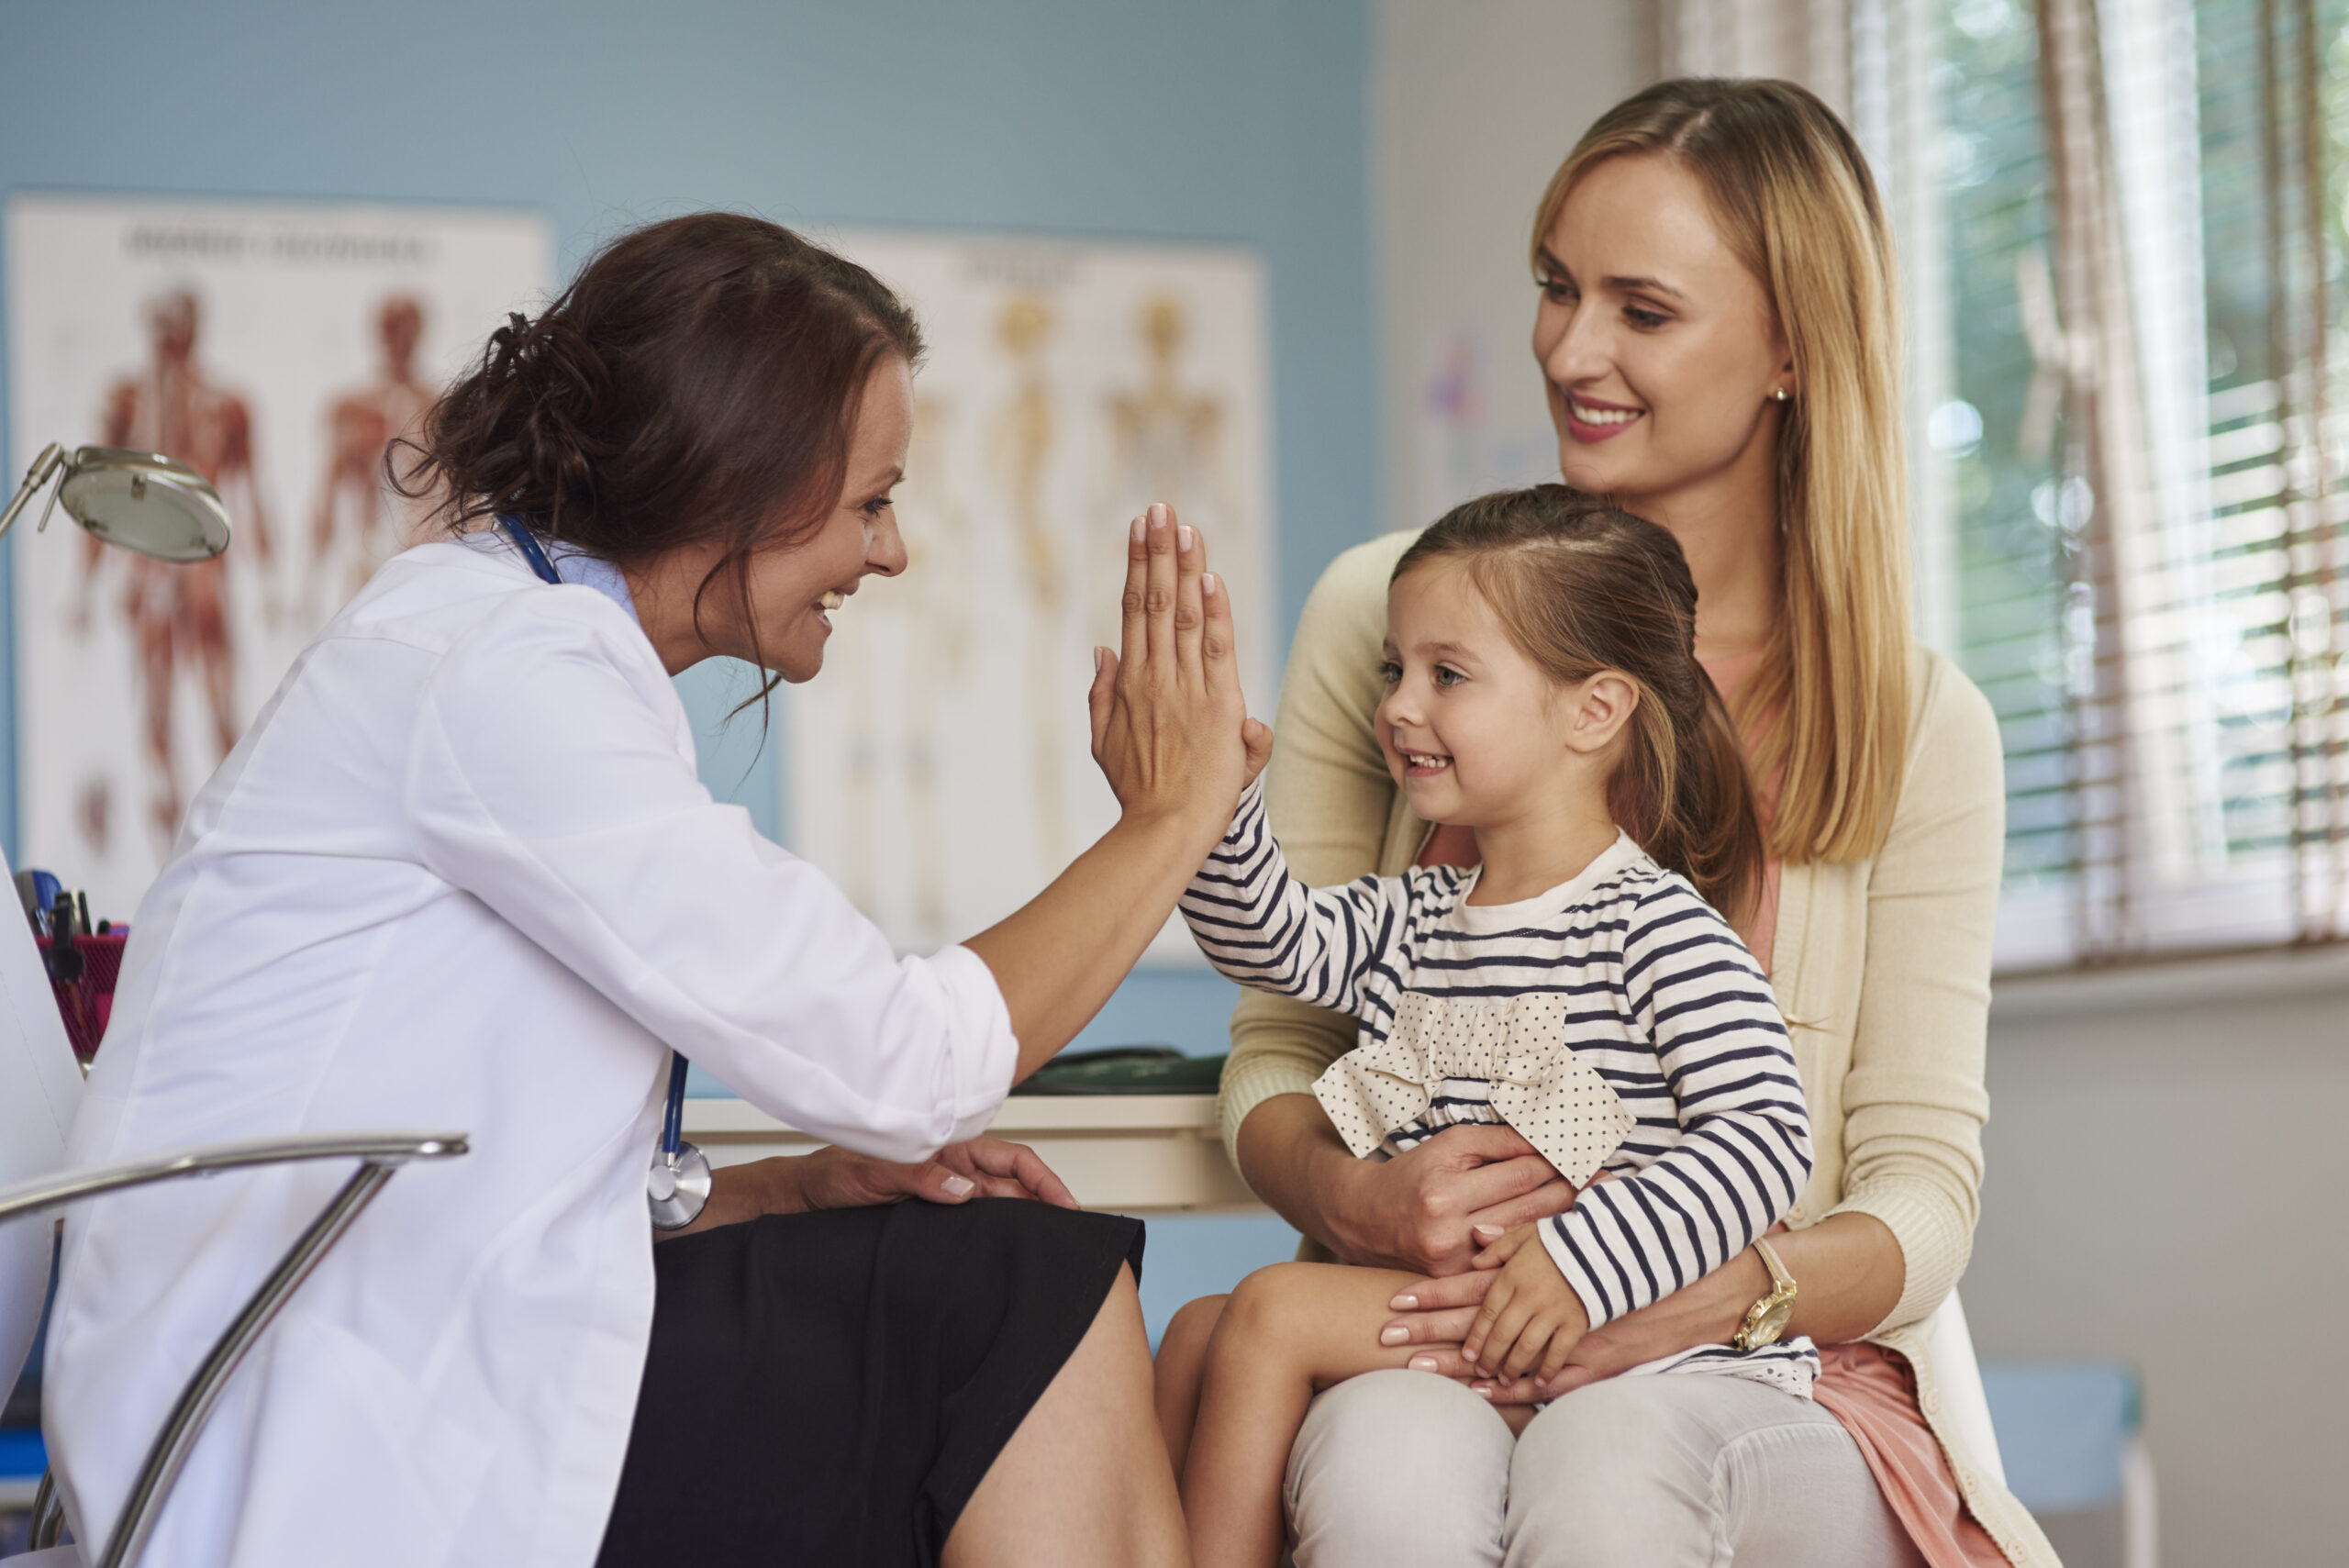 Little girl at the doctor with her mom, giving the doctor a high five